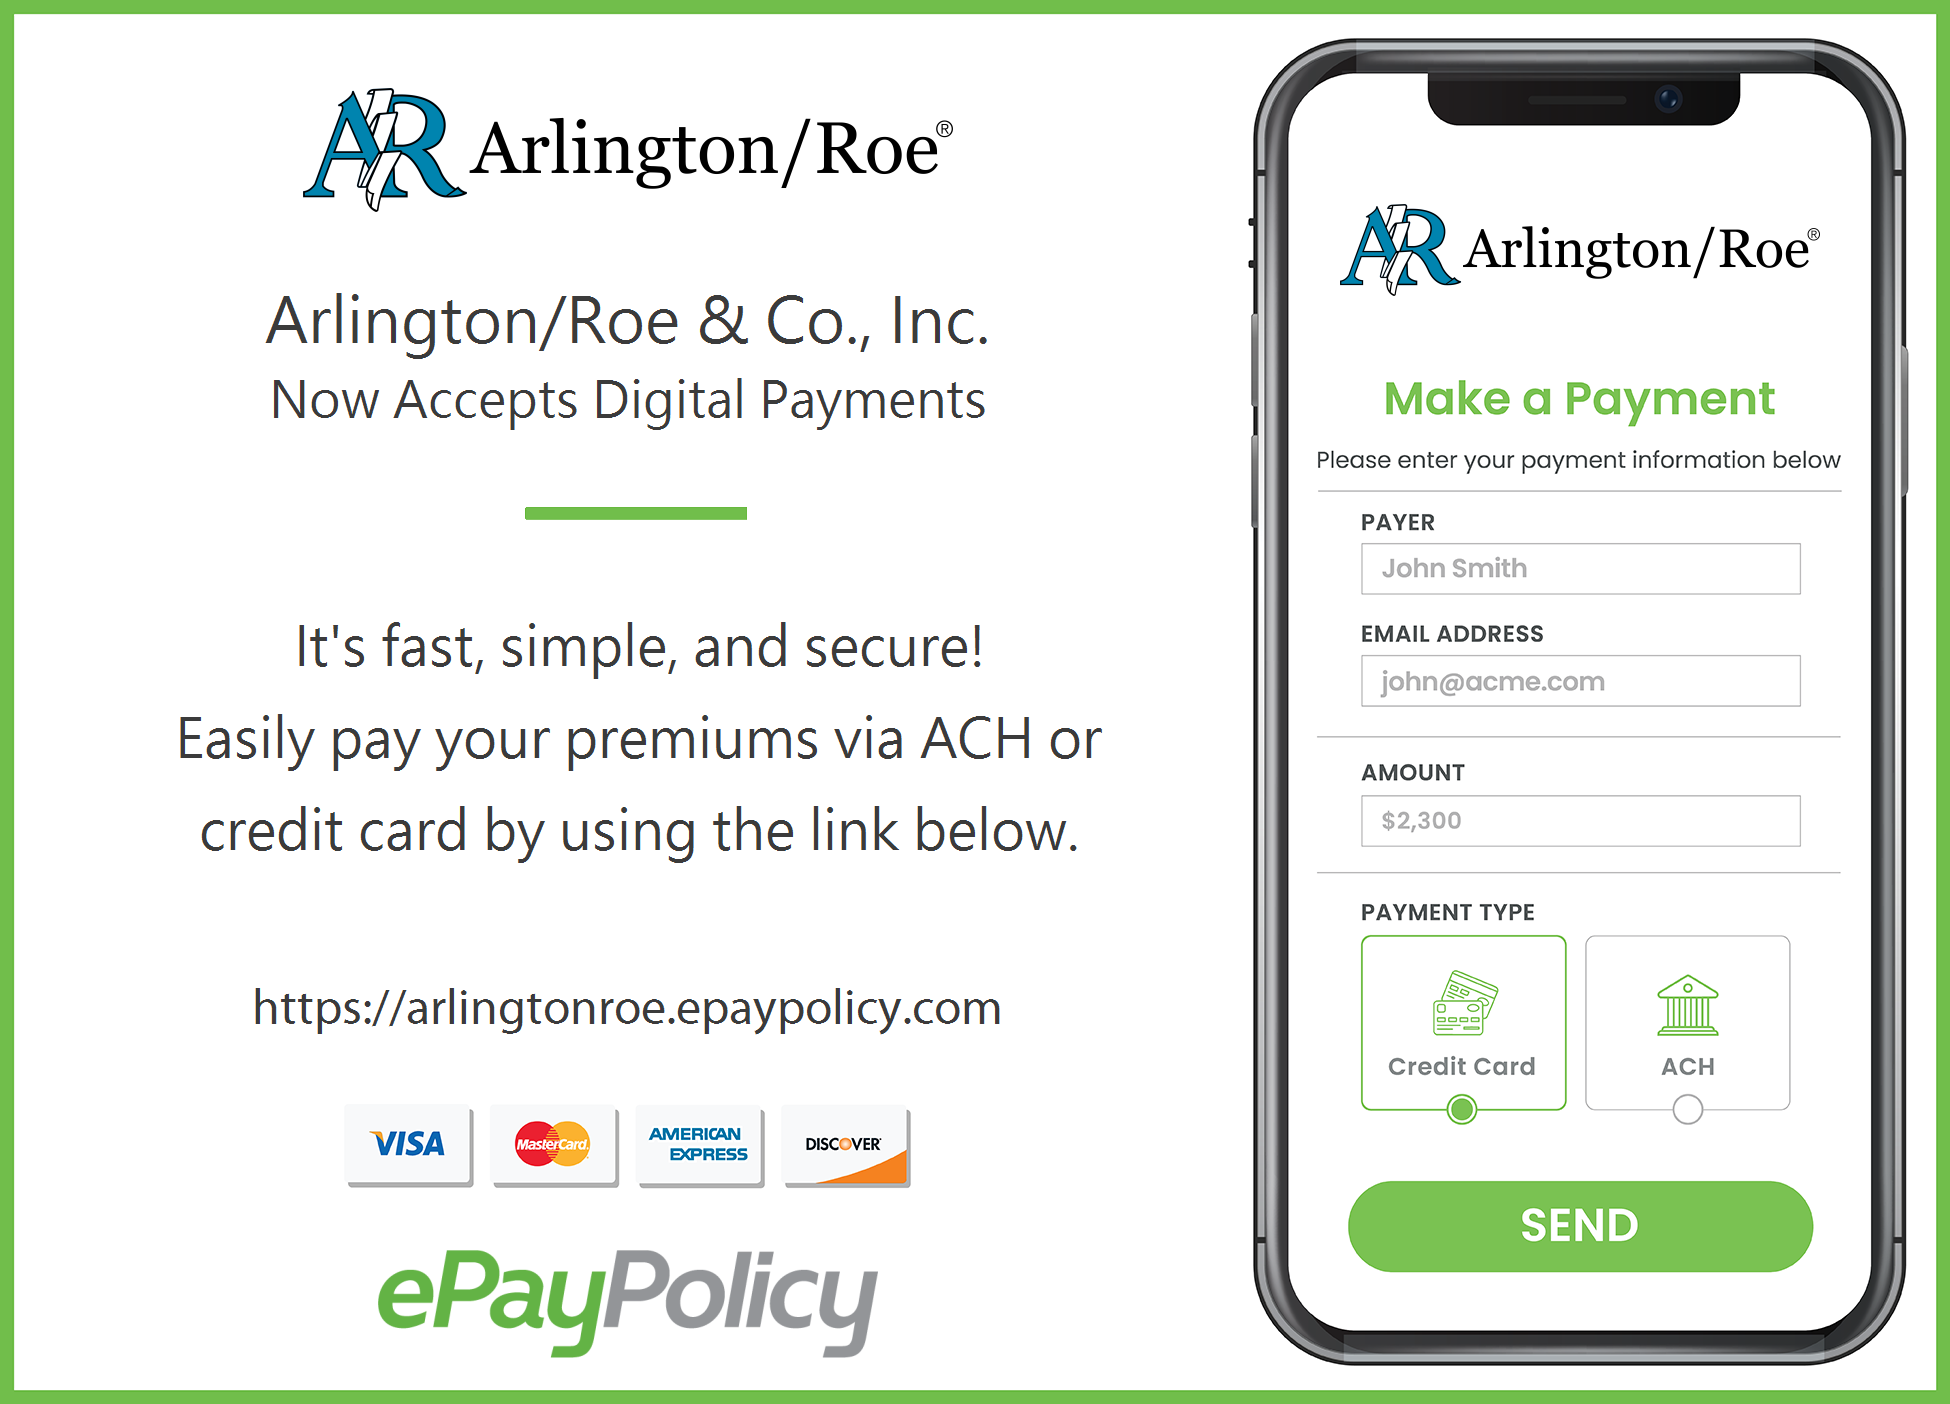 image of Arlington/Roe payment system on a smart phone